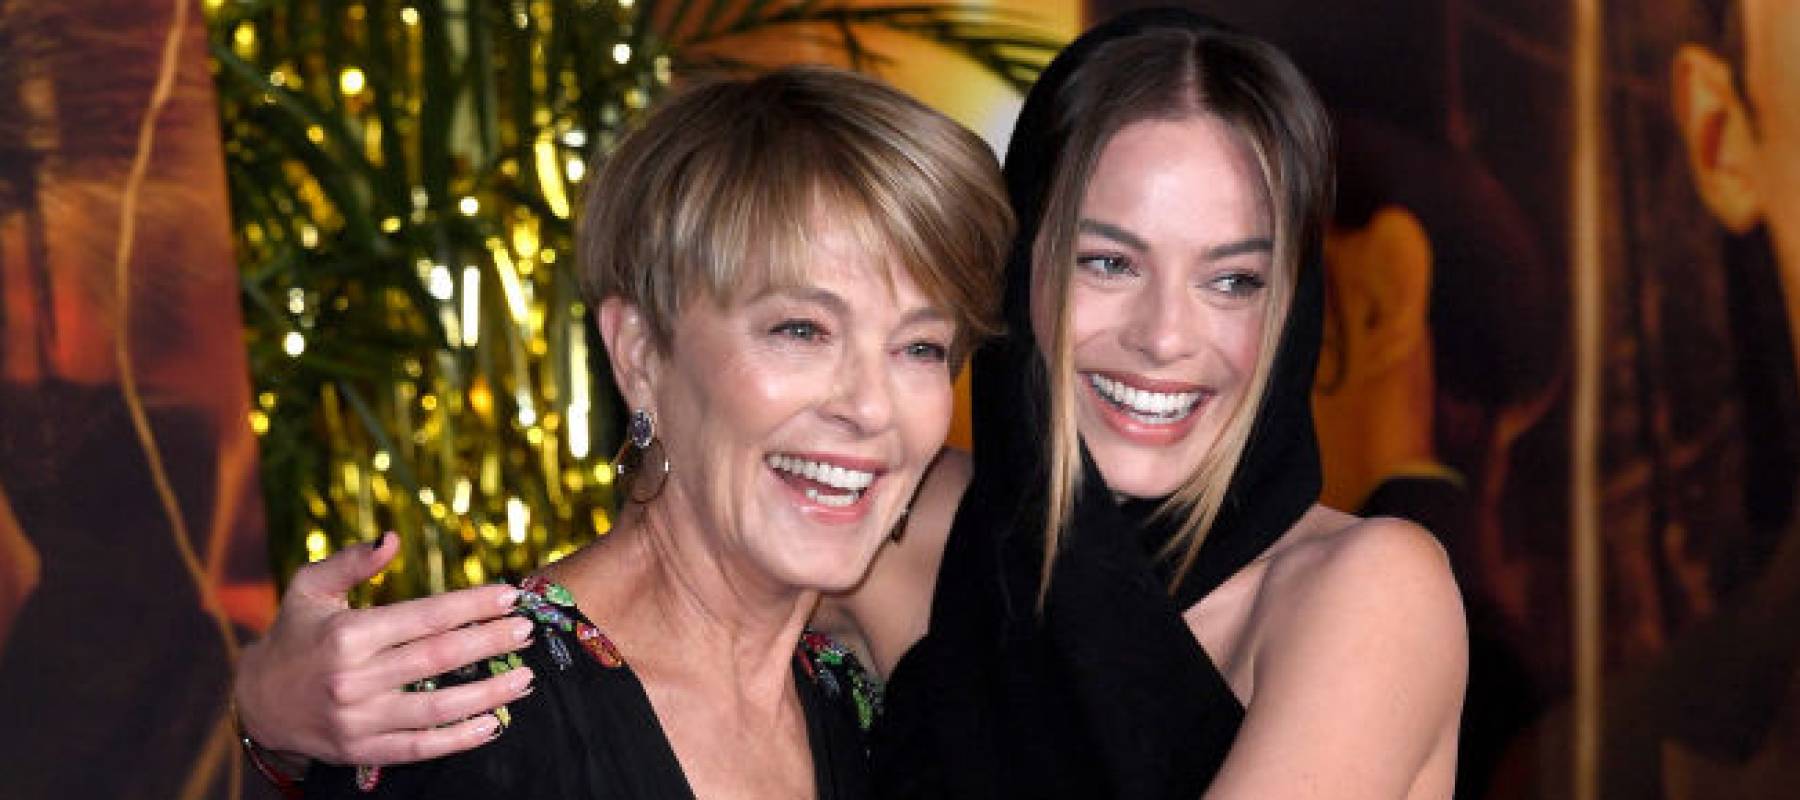 Margot Robbie poses hugging her mom at a movie premiere.